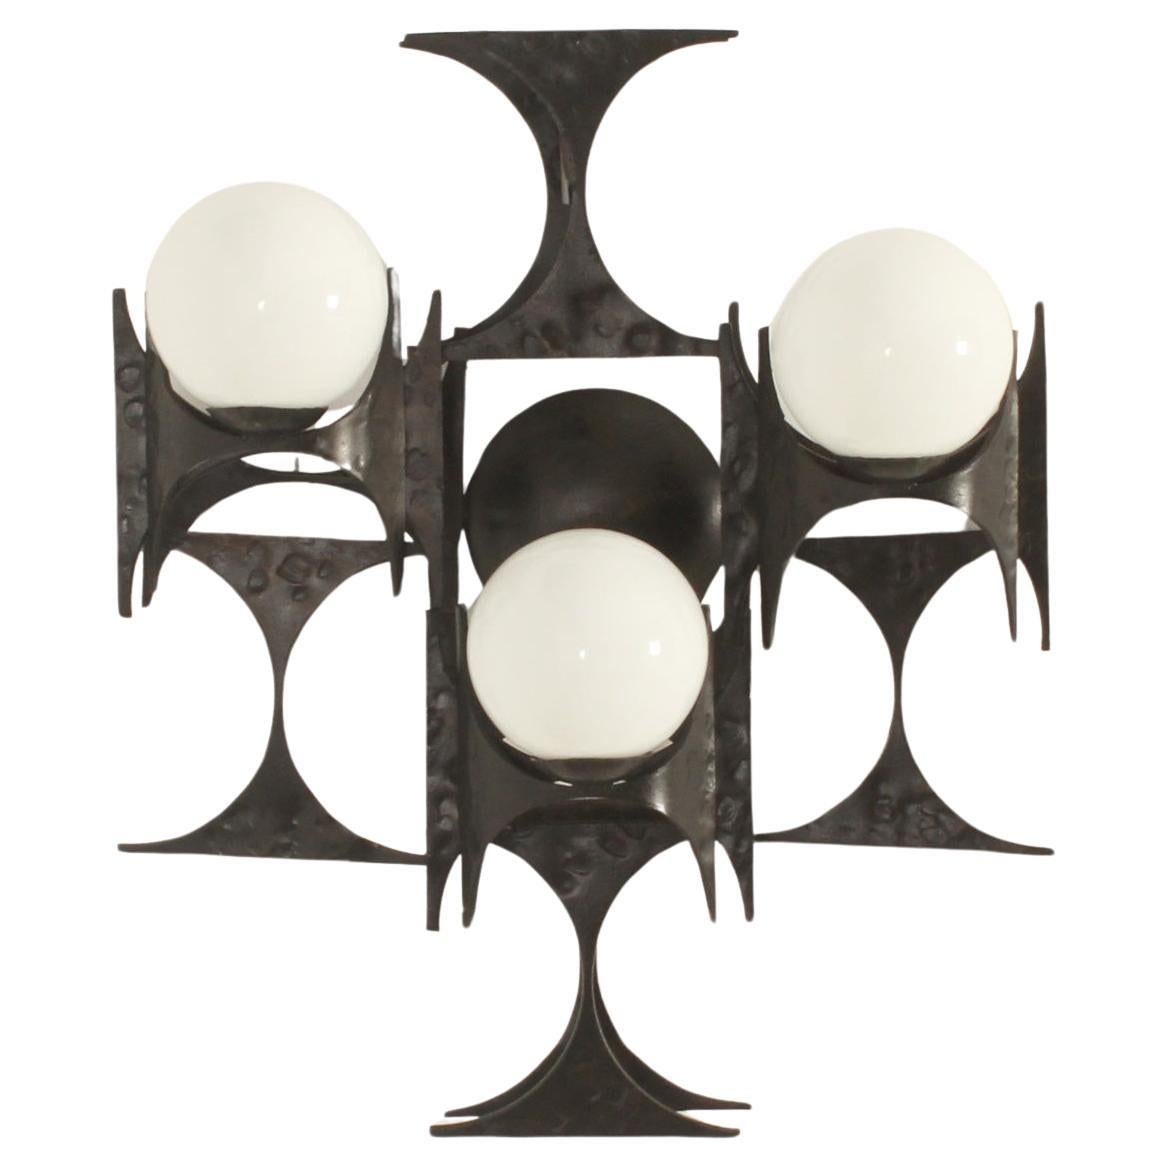 Large Spanish Brutalist Sconce in Forged Iron from 1960's